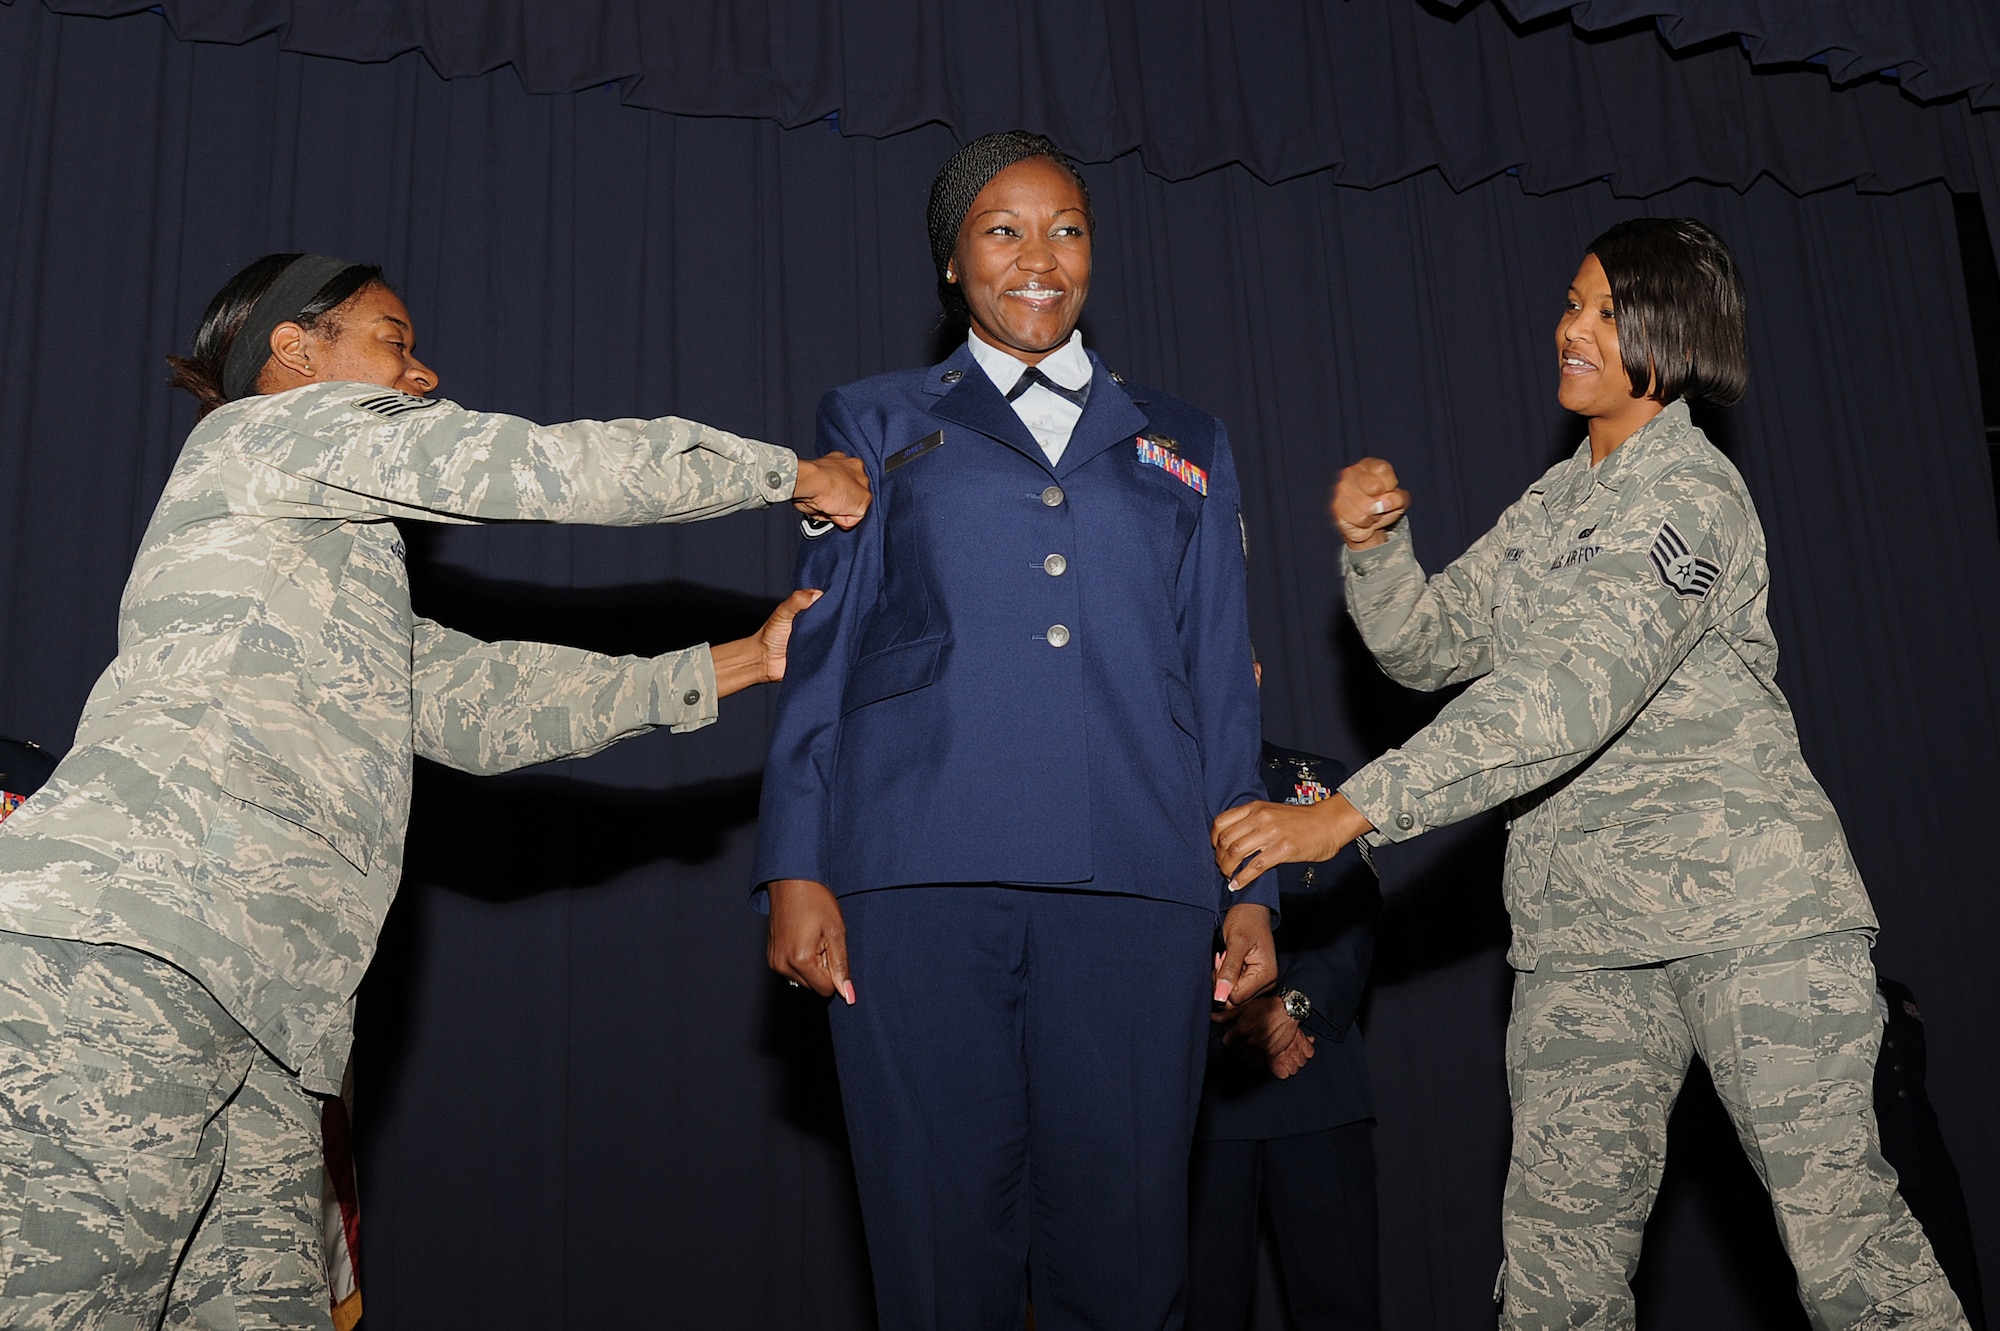 U.S. Air Force Staff Sgt. Kimberly Jones, a career development specialist with 1st Special Operations Force Support Squadron, withstands the punches that mark her transition to staff sergeant during an NCO recognition ceremony at the King Auditorium on Hurlburt Field, Fla., Oct. 30, 2012. Part of the NCO recognition ceremony is the reading of the NCO Charge, which lays out the new responsibilities as staff sergeants. (U.S. Air Force Photo/Airman 1st Class Michelle Vickers)